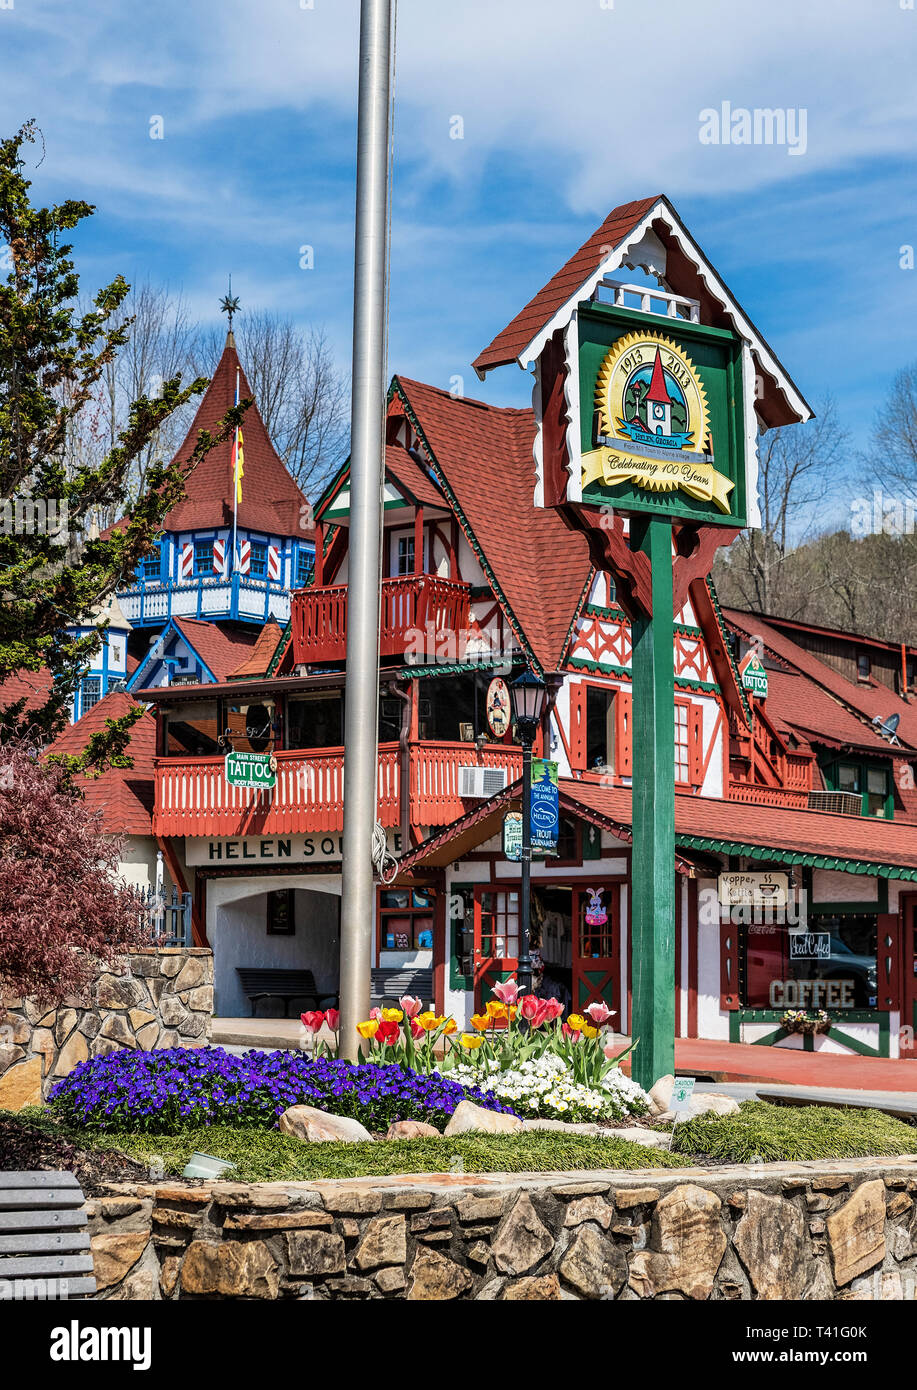 Helen, Georgia is a town modeled on a Bavarian alpine design motif that has made it a tourist attraction. Stock Photo